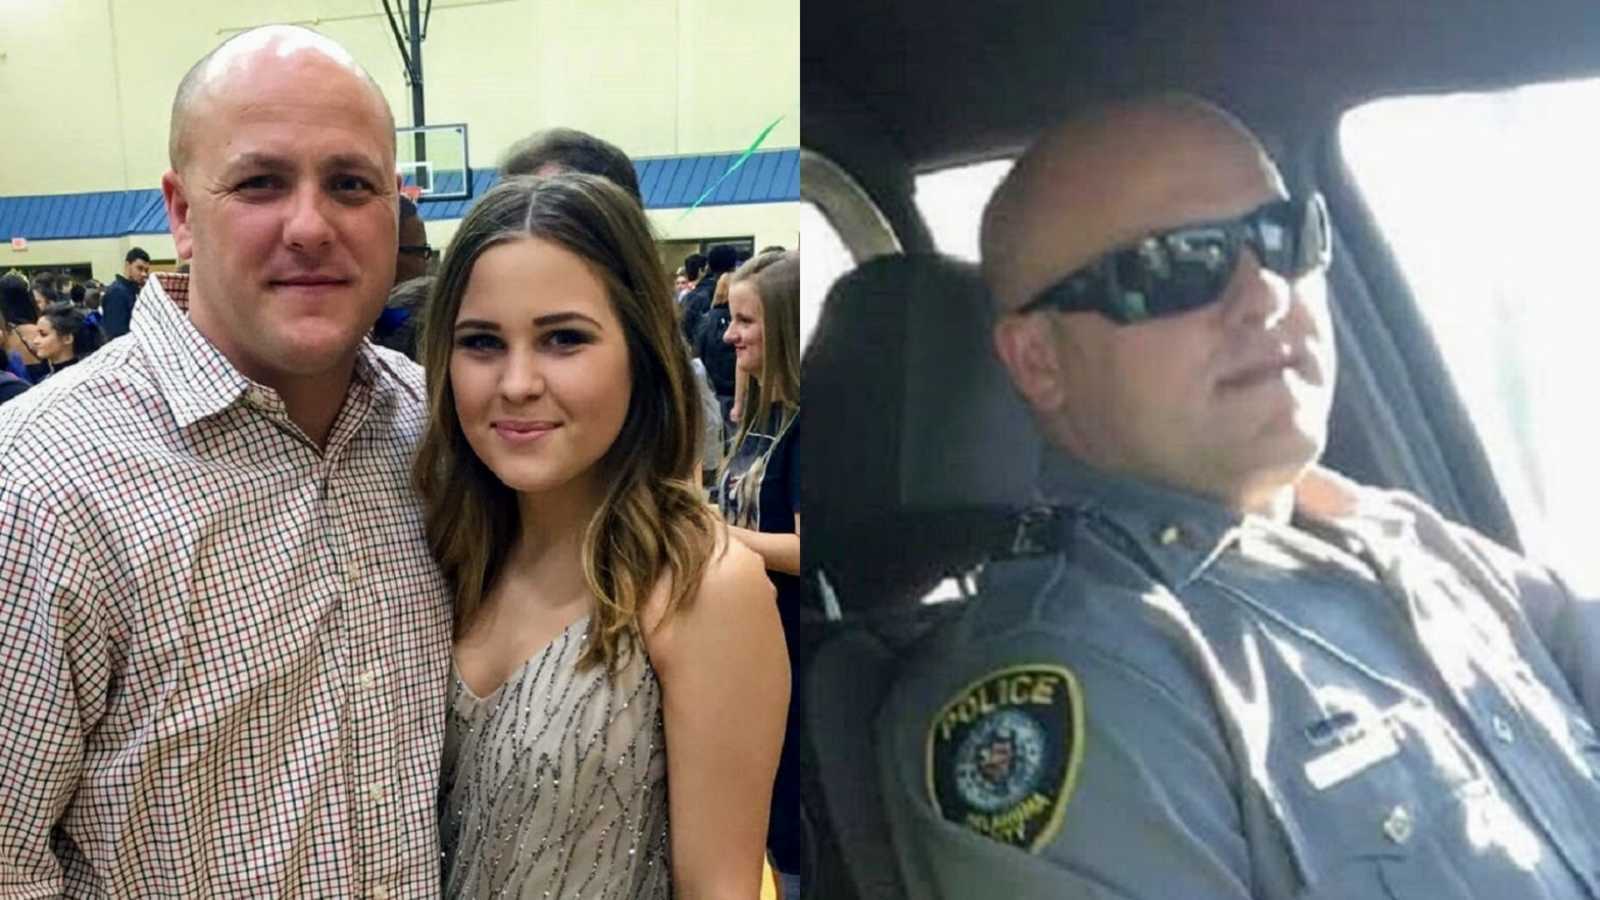 girl stands with police officer father